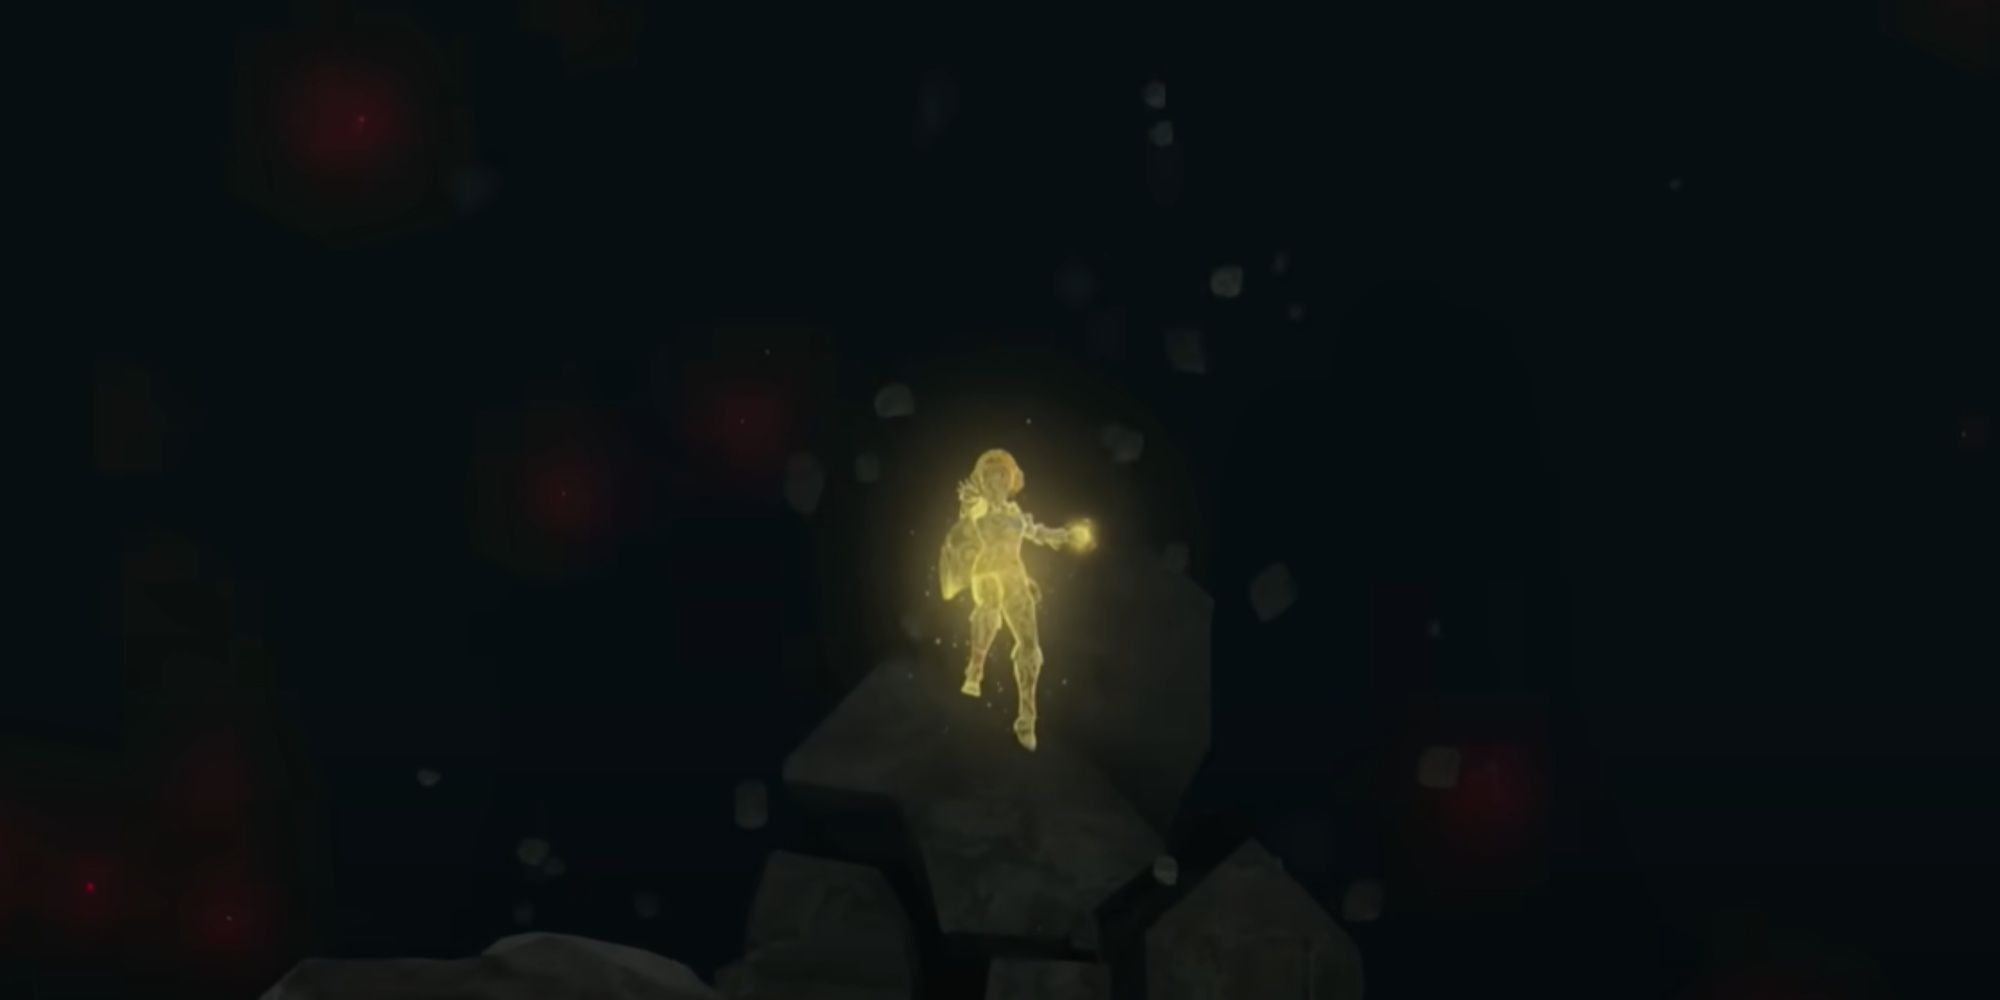 Zelda in the glow of the Secret Stone while falling in Tears of the Realm